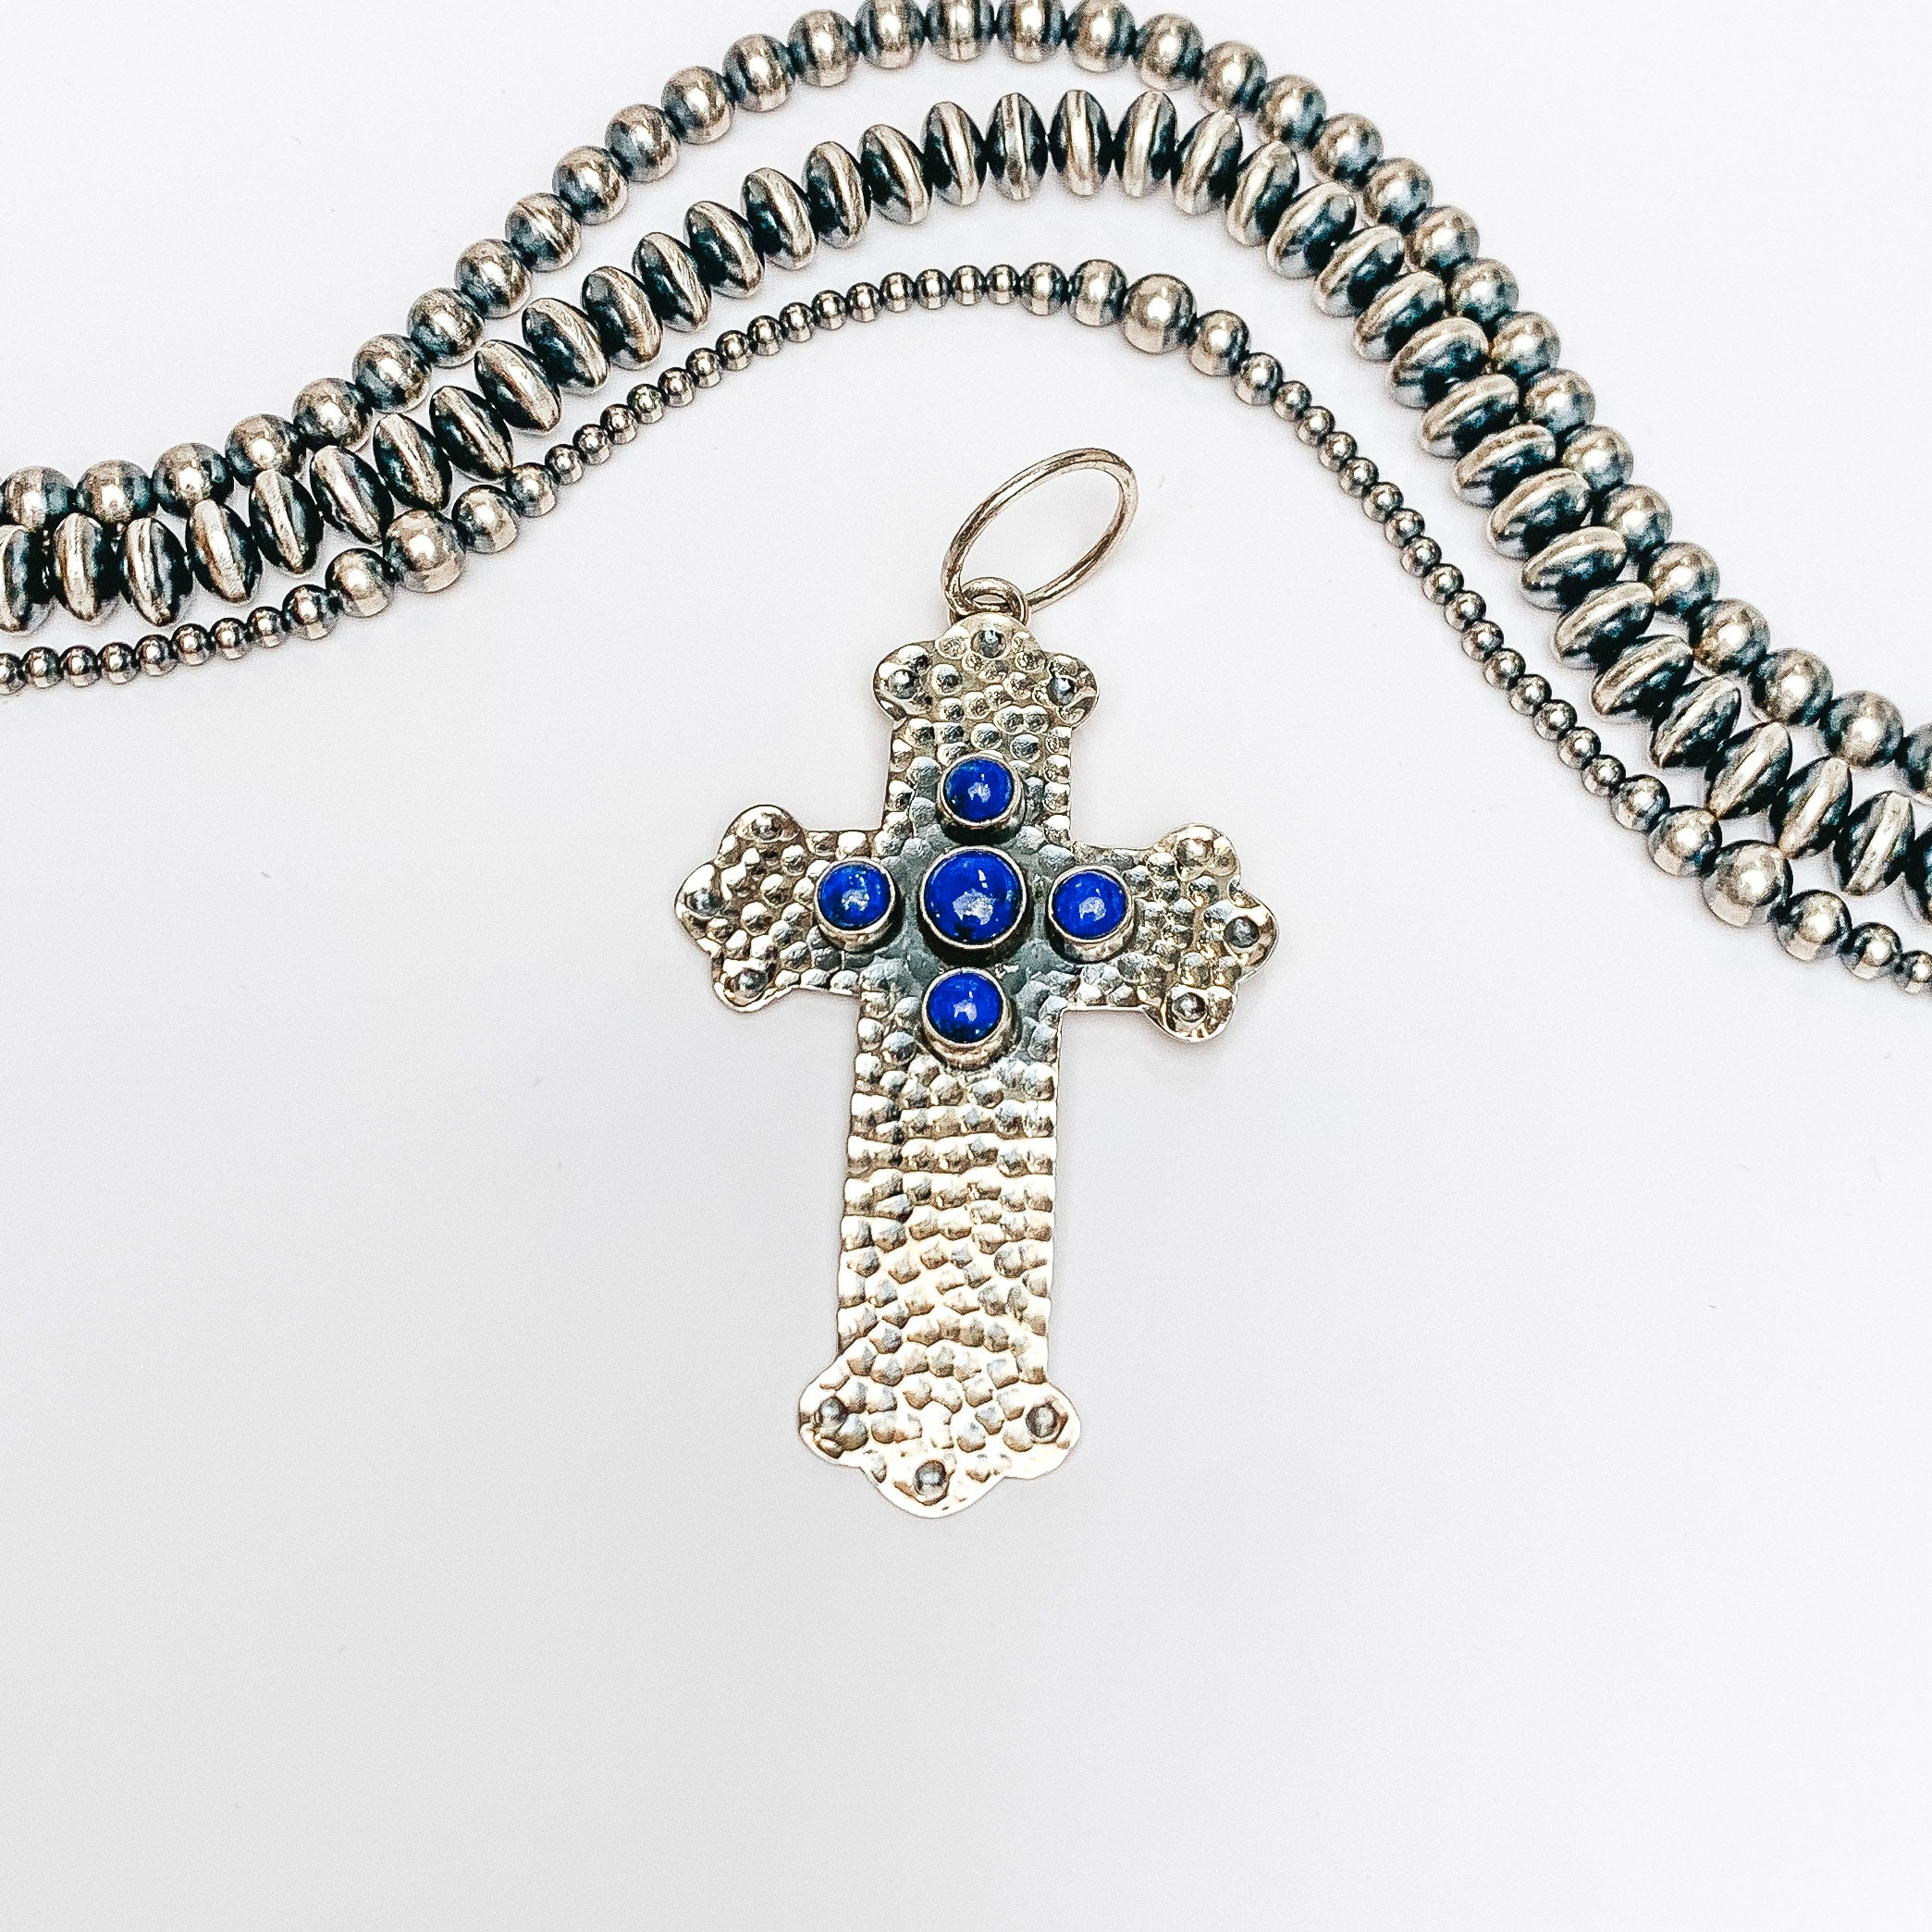 Centered in the picture is a hammered pattern cross pendant with 5 dark lapis stones. Navajo pearls are laid above the cross, all on a white background.